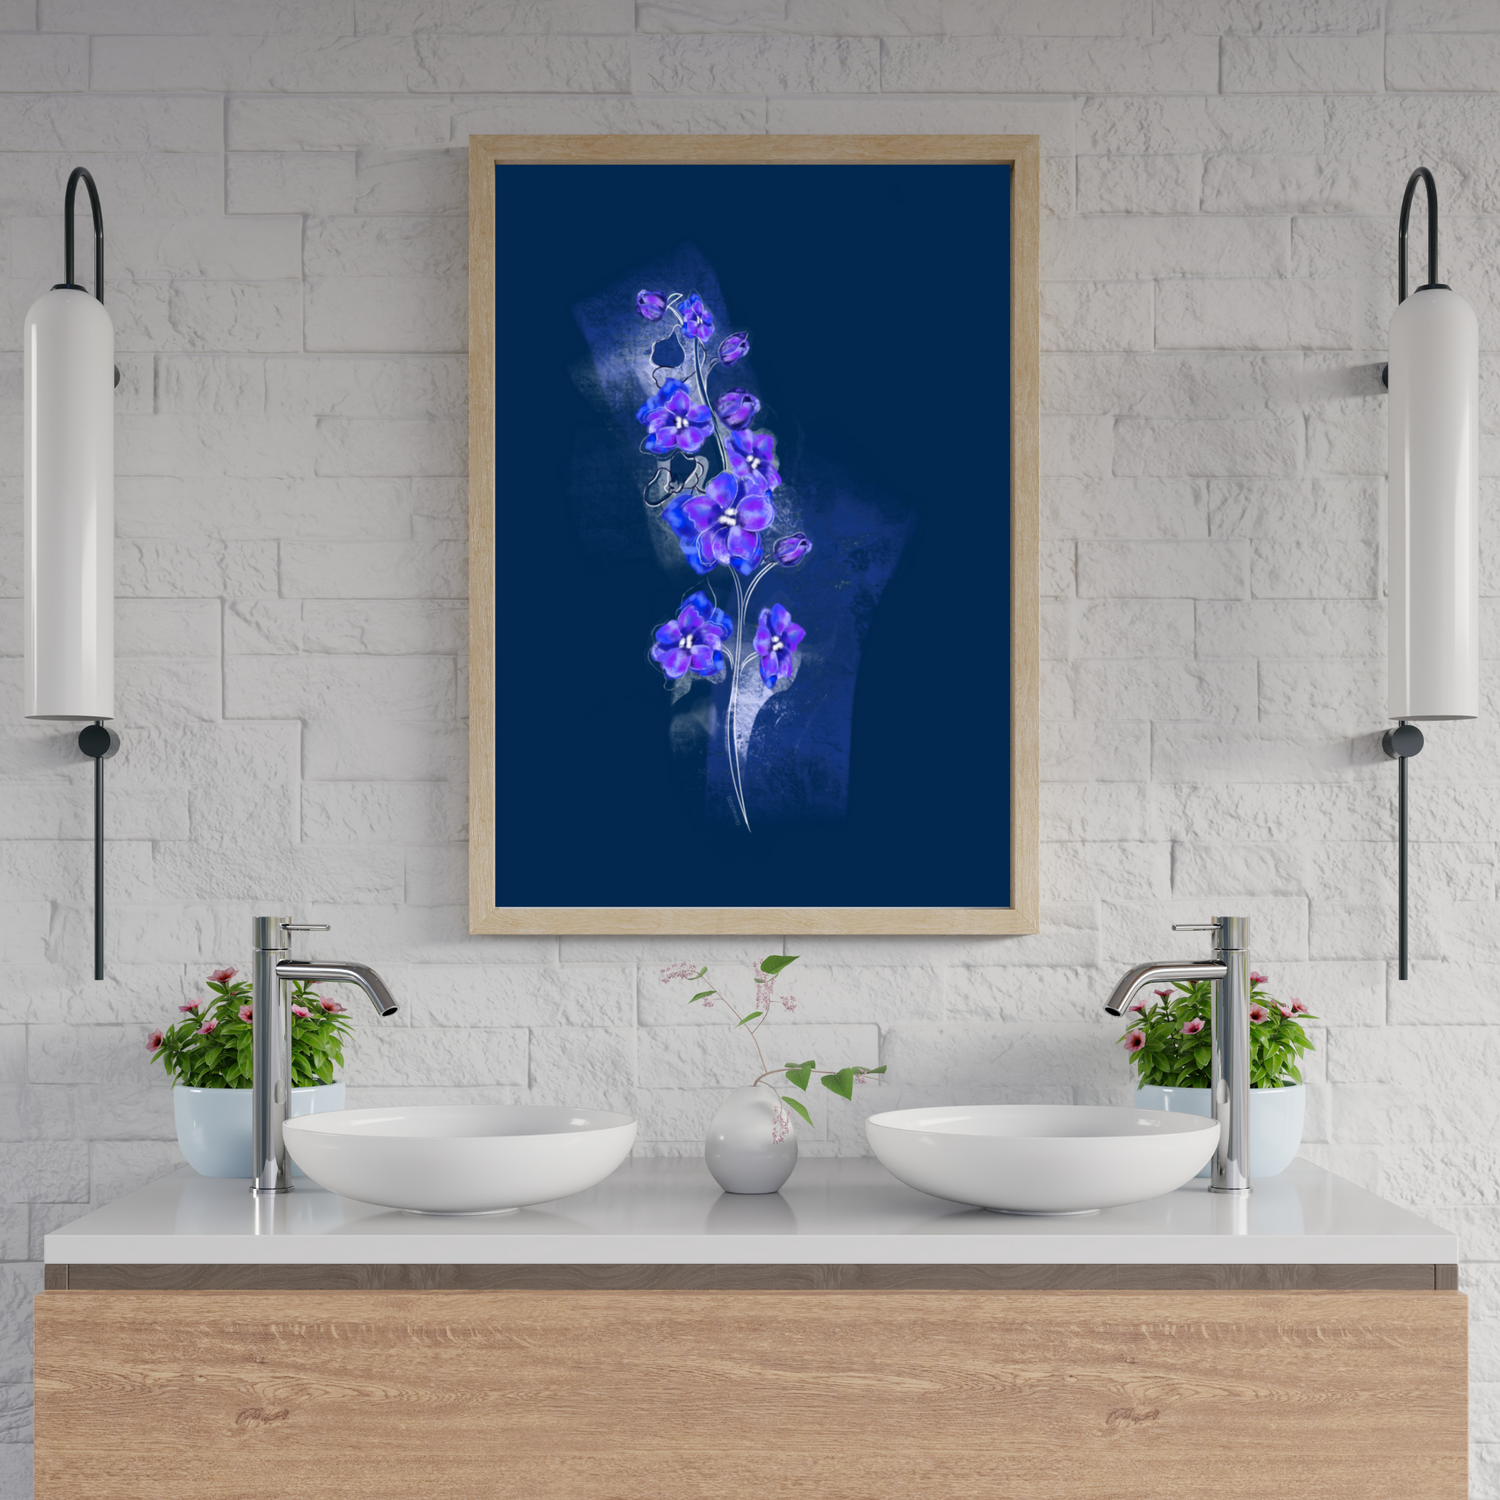 An example of the Larkspur painting by ArisaTeam in a bathroom